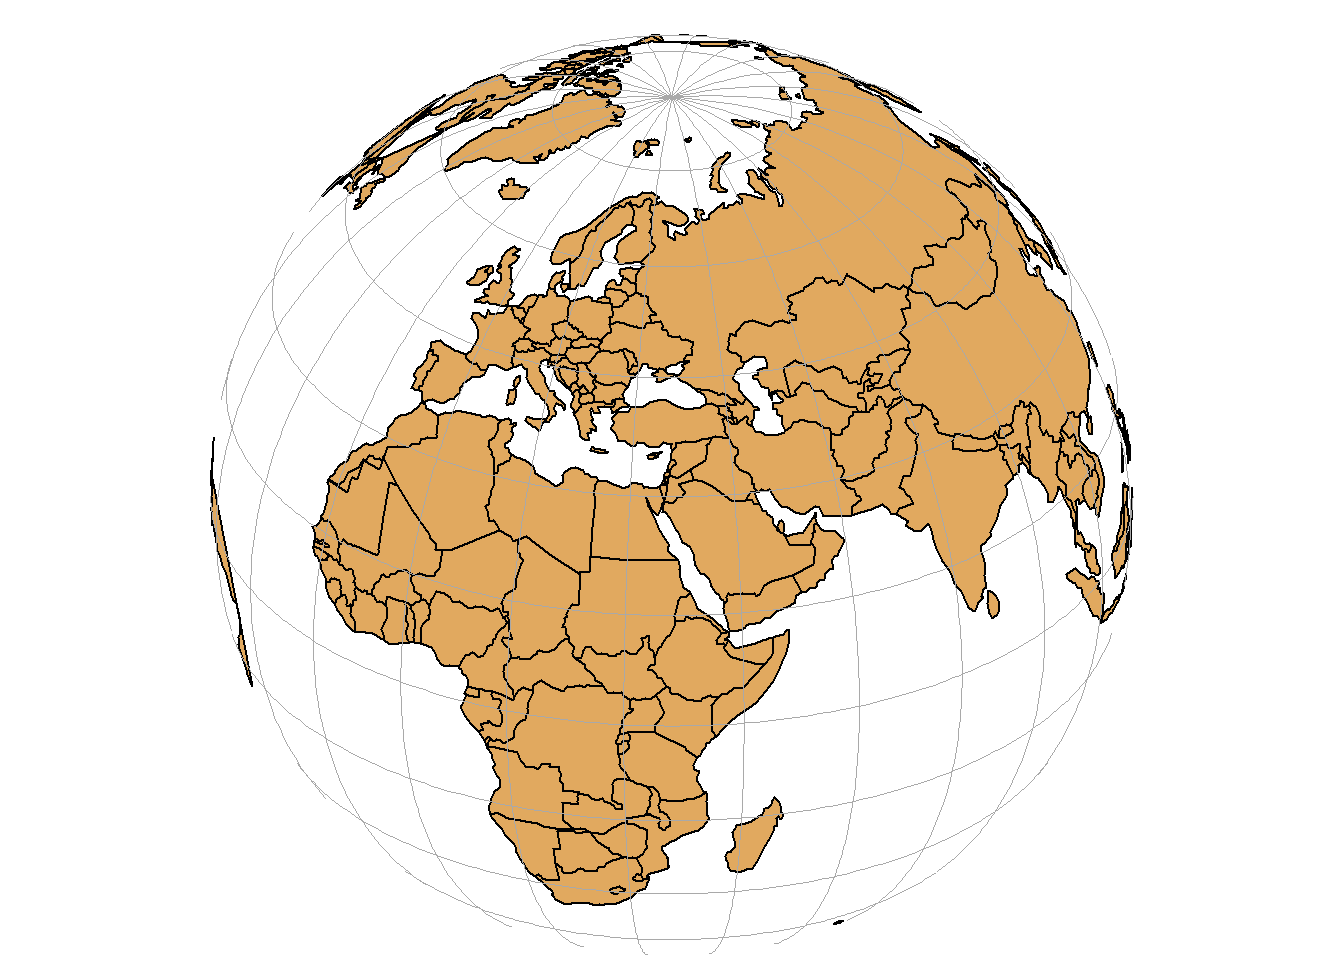 Three-dimensional surface of the Earth (left), and two-dimensional representation of the Earth (right).